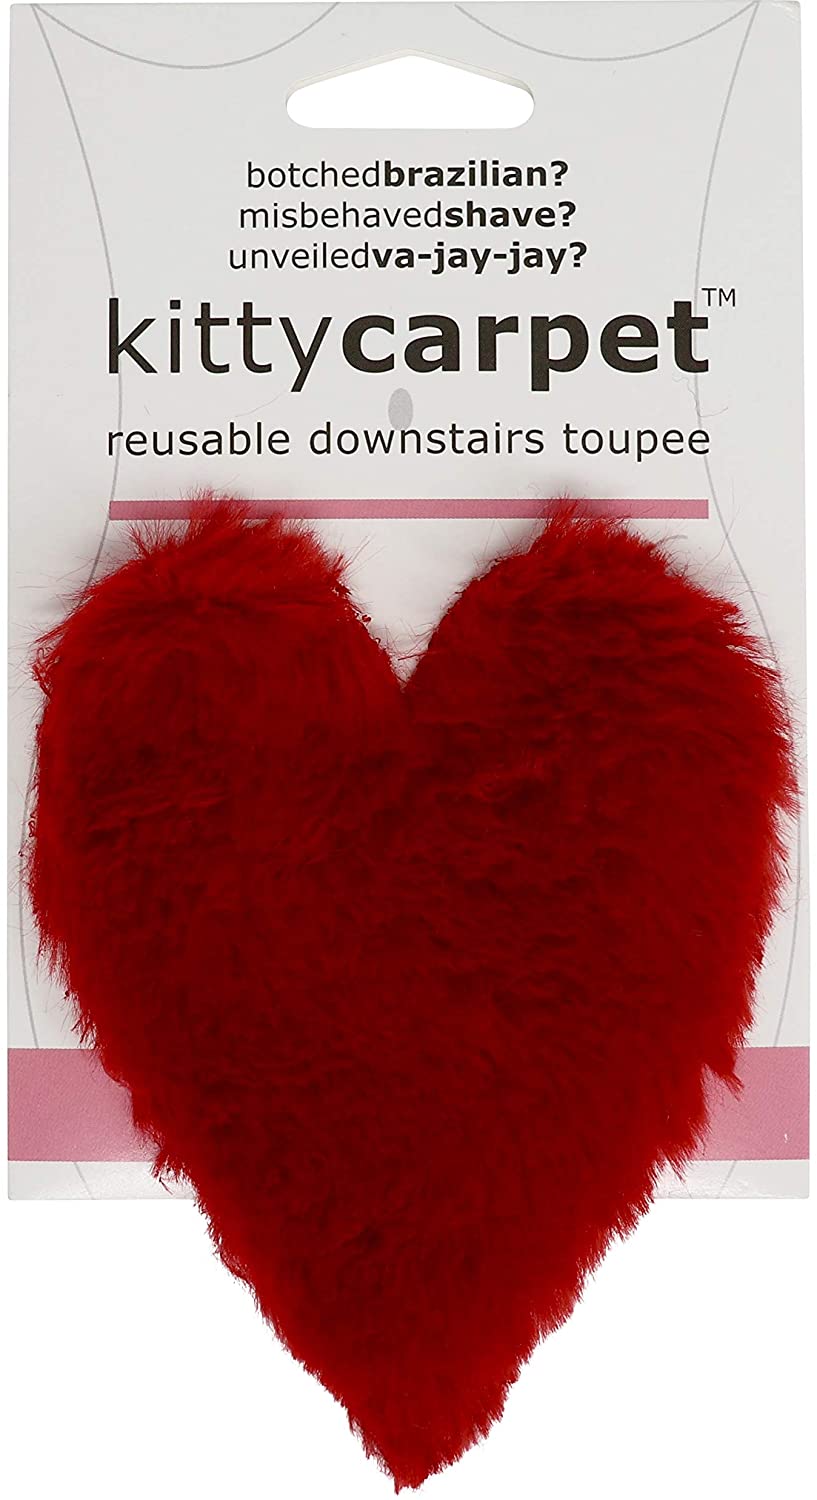 Kitty Carpet Reusable Downstairs Toupee Merkin, Funny Gag Gifts for Women (Red Heart)